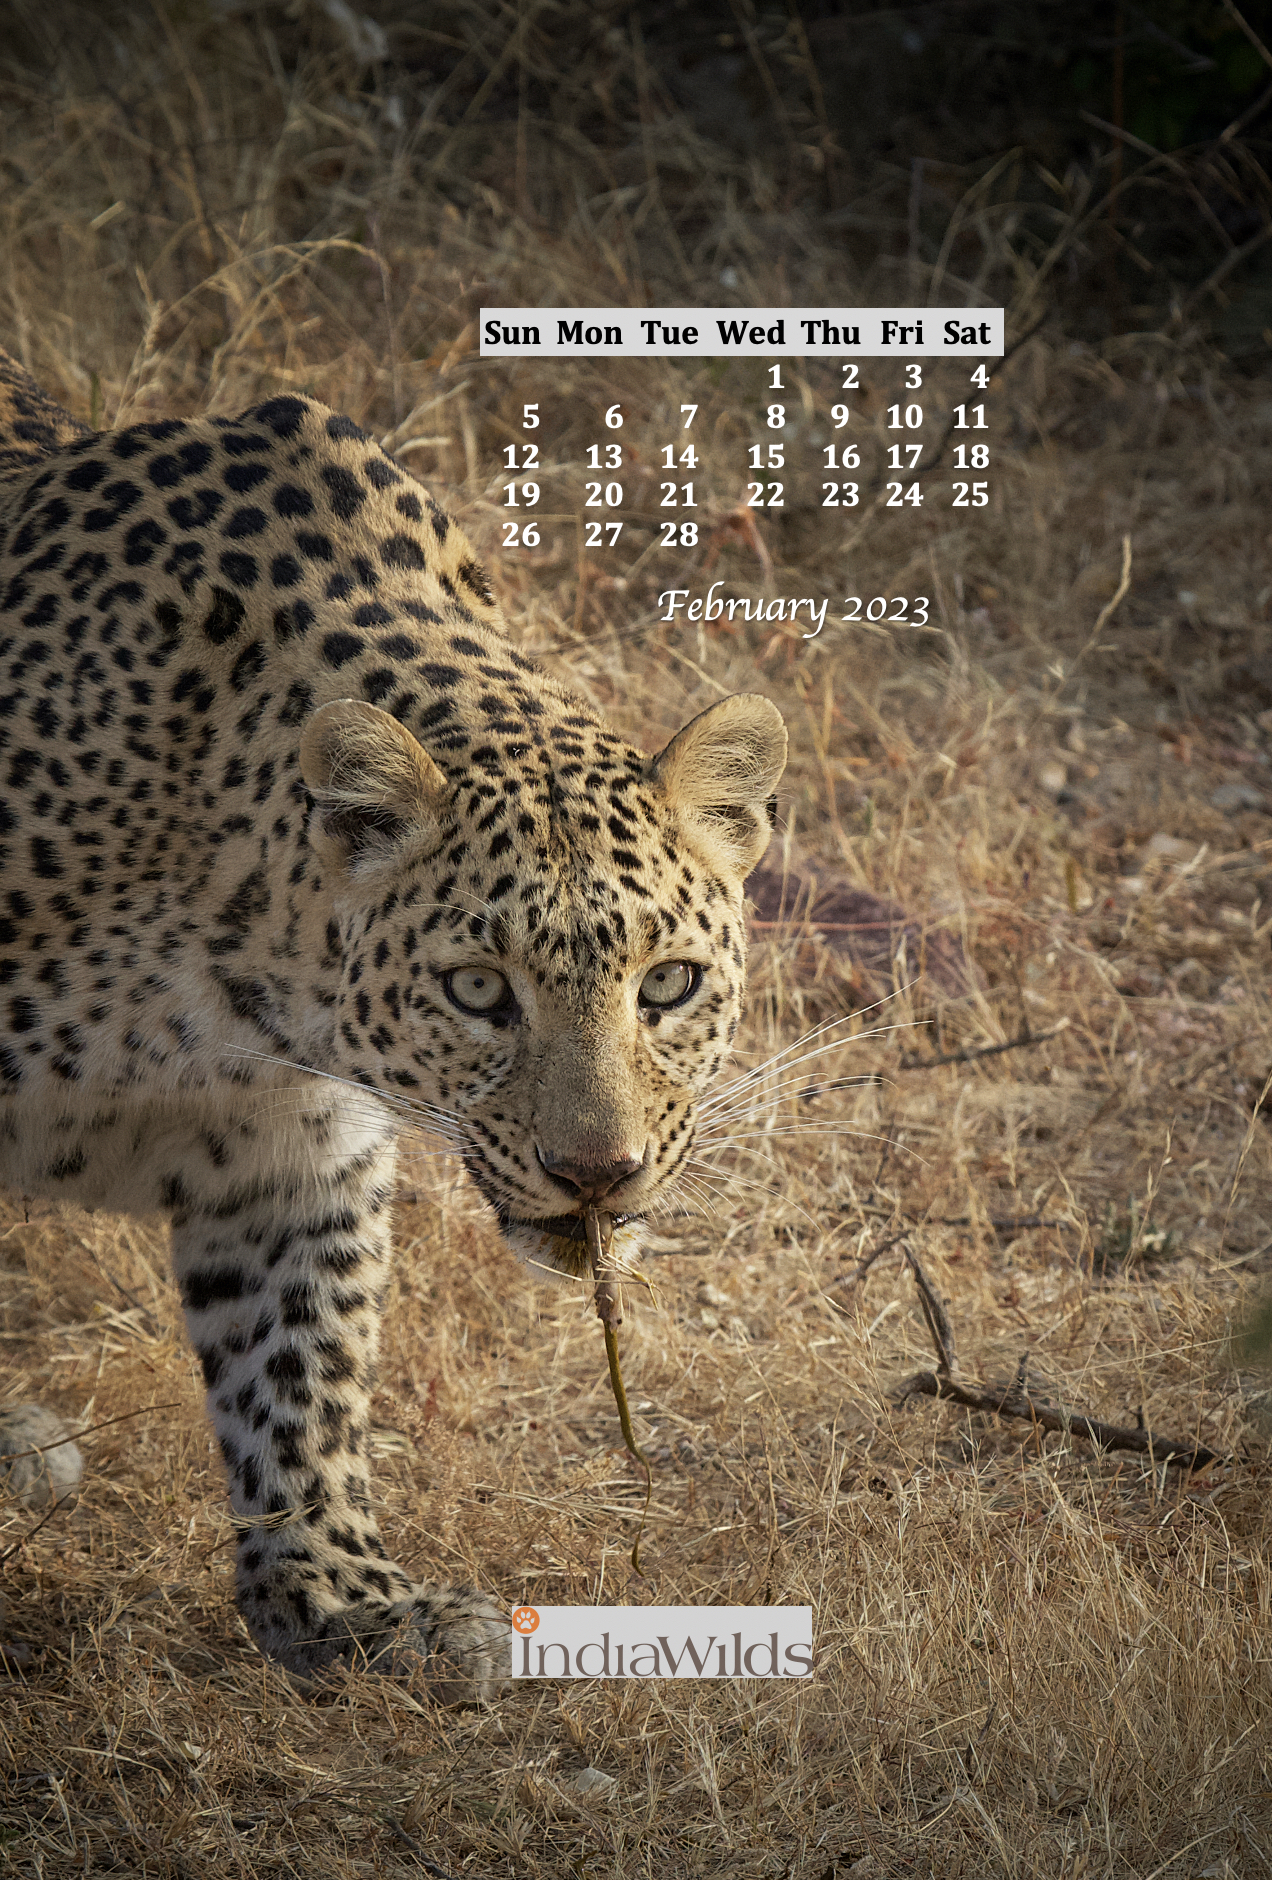 IndiaWilds Monthly Mobile Wallpaper Calendar 2023